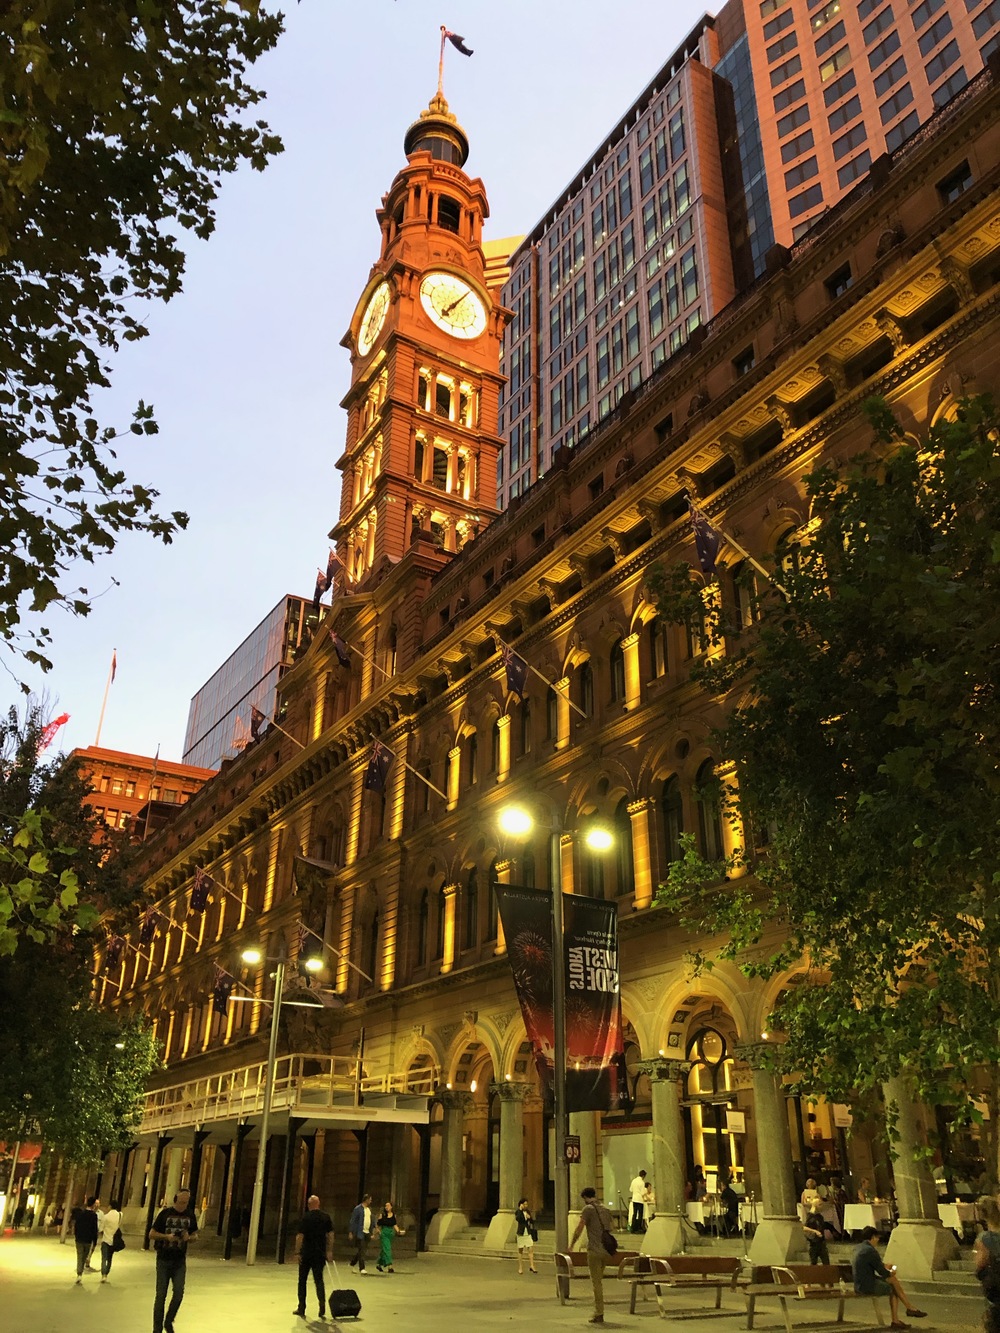 No. 1 Martin Place building by sunset